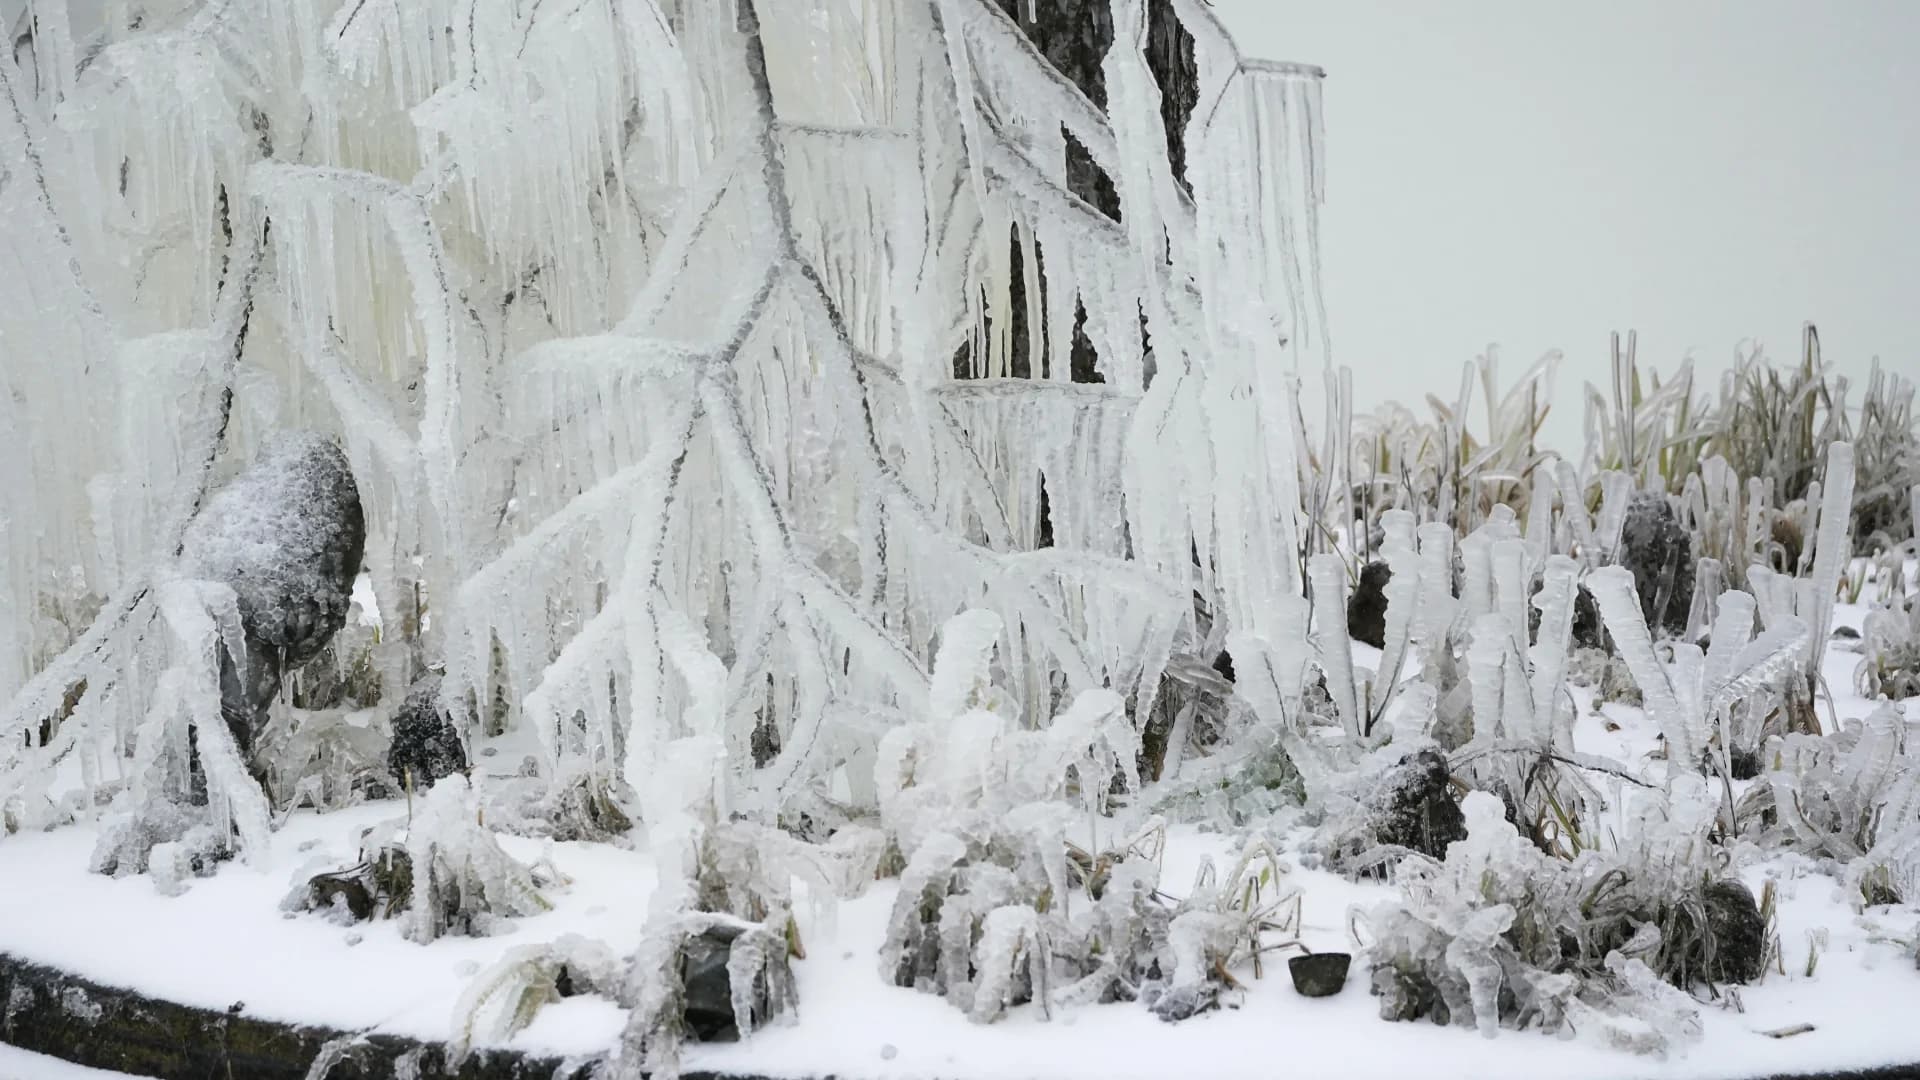 Are you ready for ice storms? Here are 10 tips to keep you safe on the road and at home